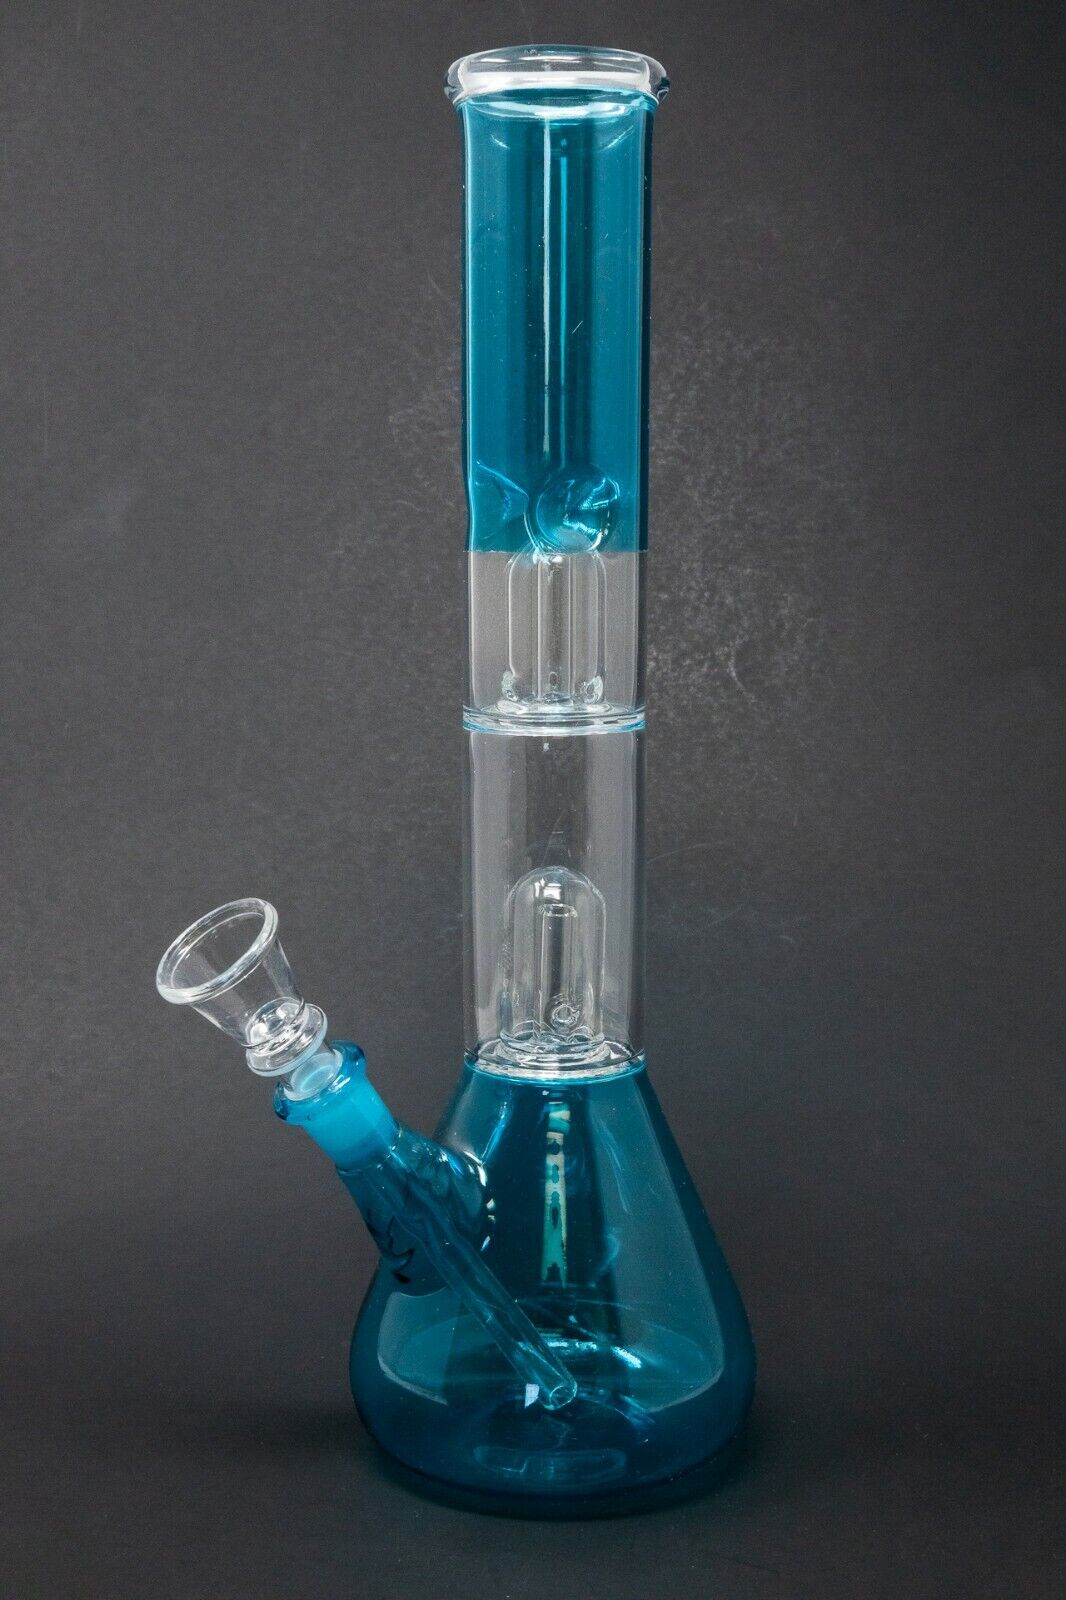 12 Glass Teal Hookah Water Pipe Tobacco Double Perolator Bong w/ Ice Catcher. Available Now for 34.99